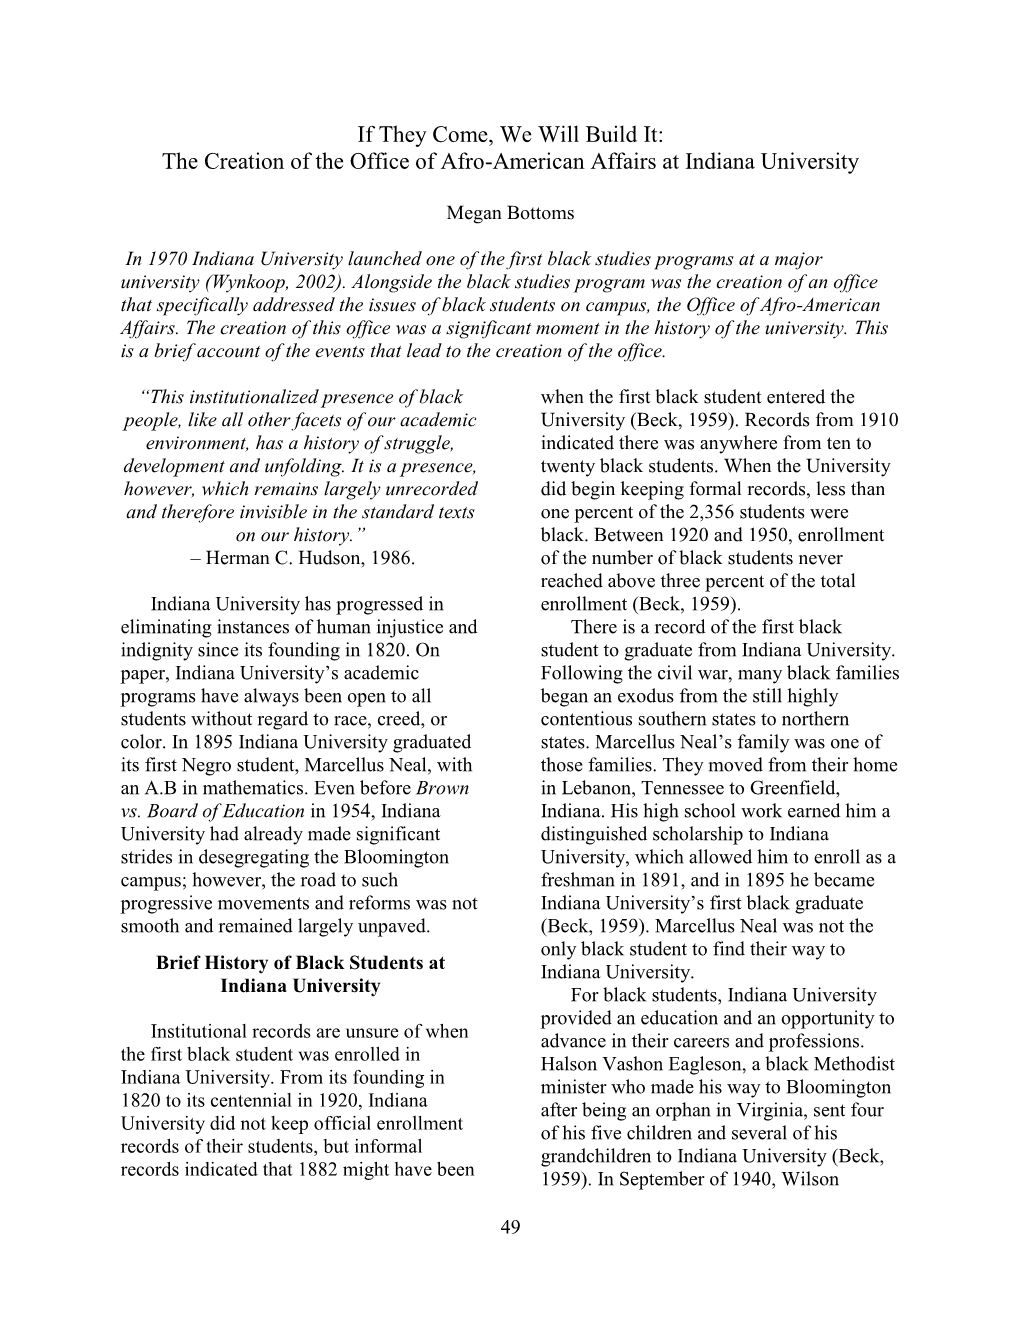 The Creation of the Office of Afro-American Affairs at Indiana University